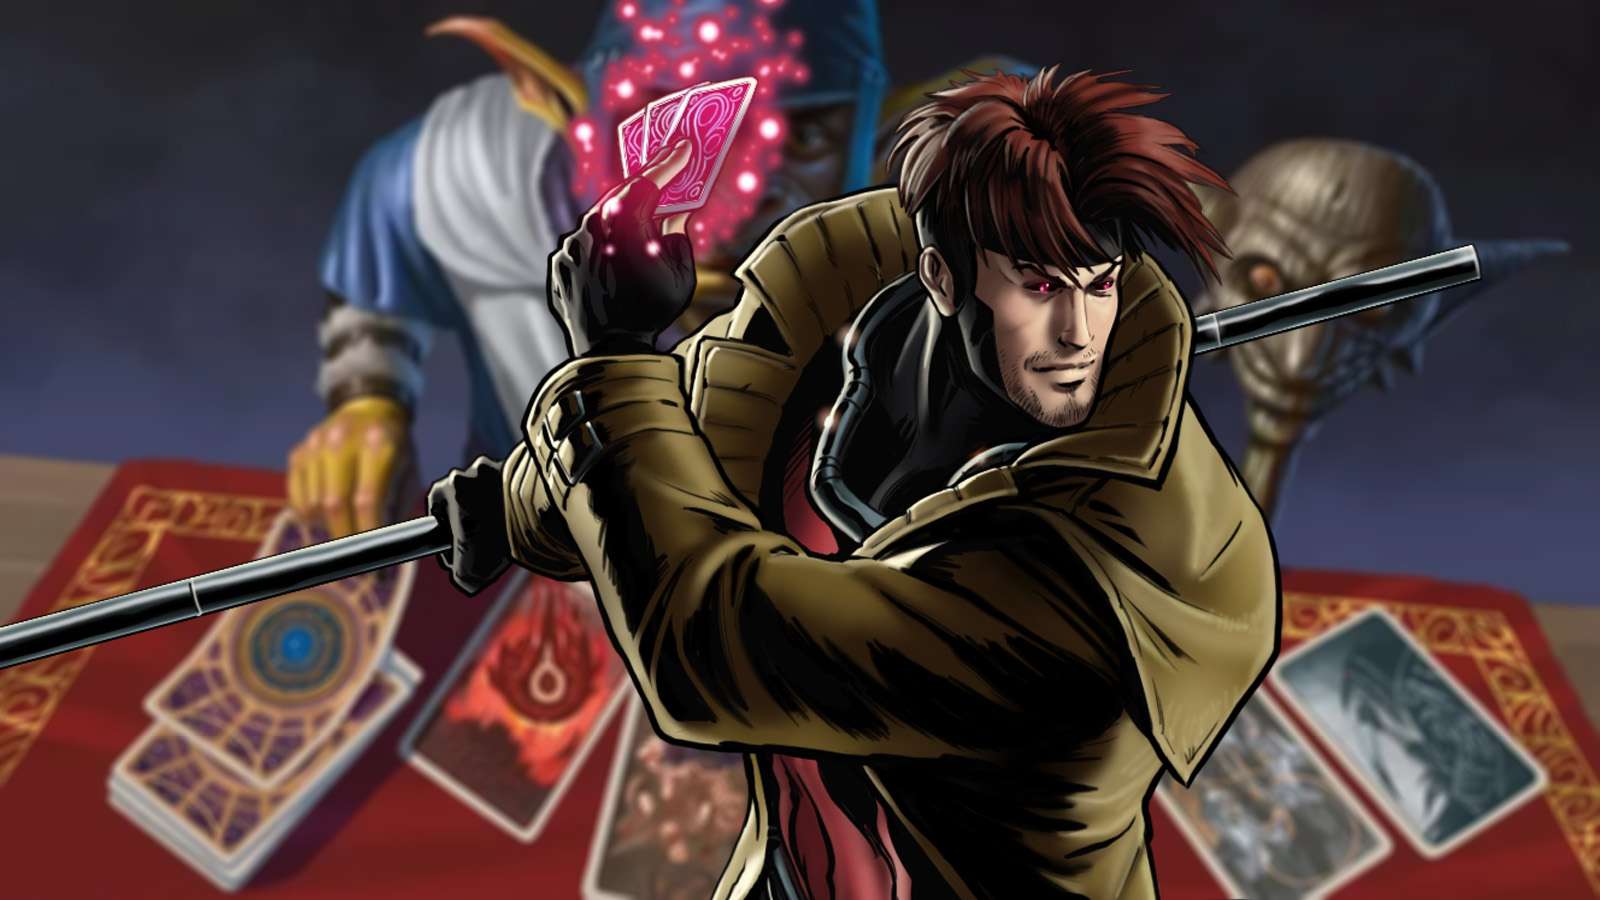 Gambit from the X-Men on the cover of D&D 5's Book of Many Things